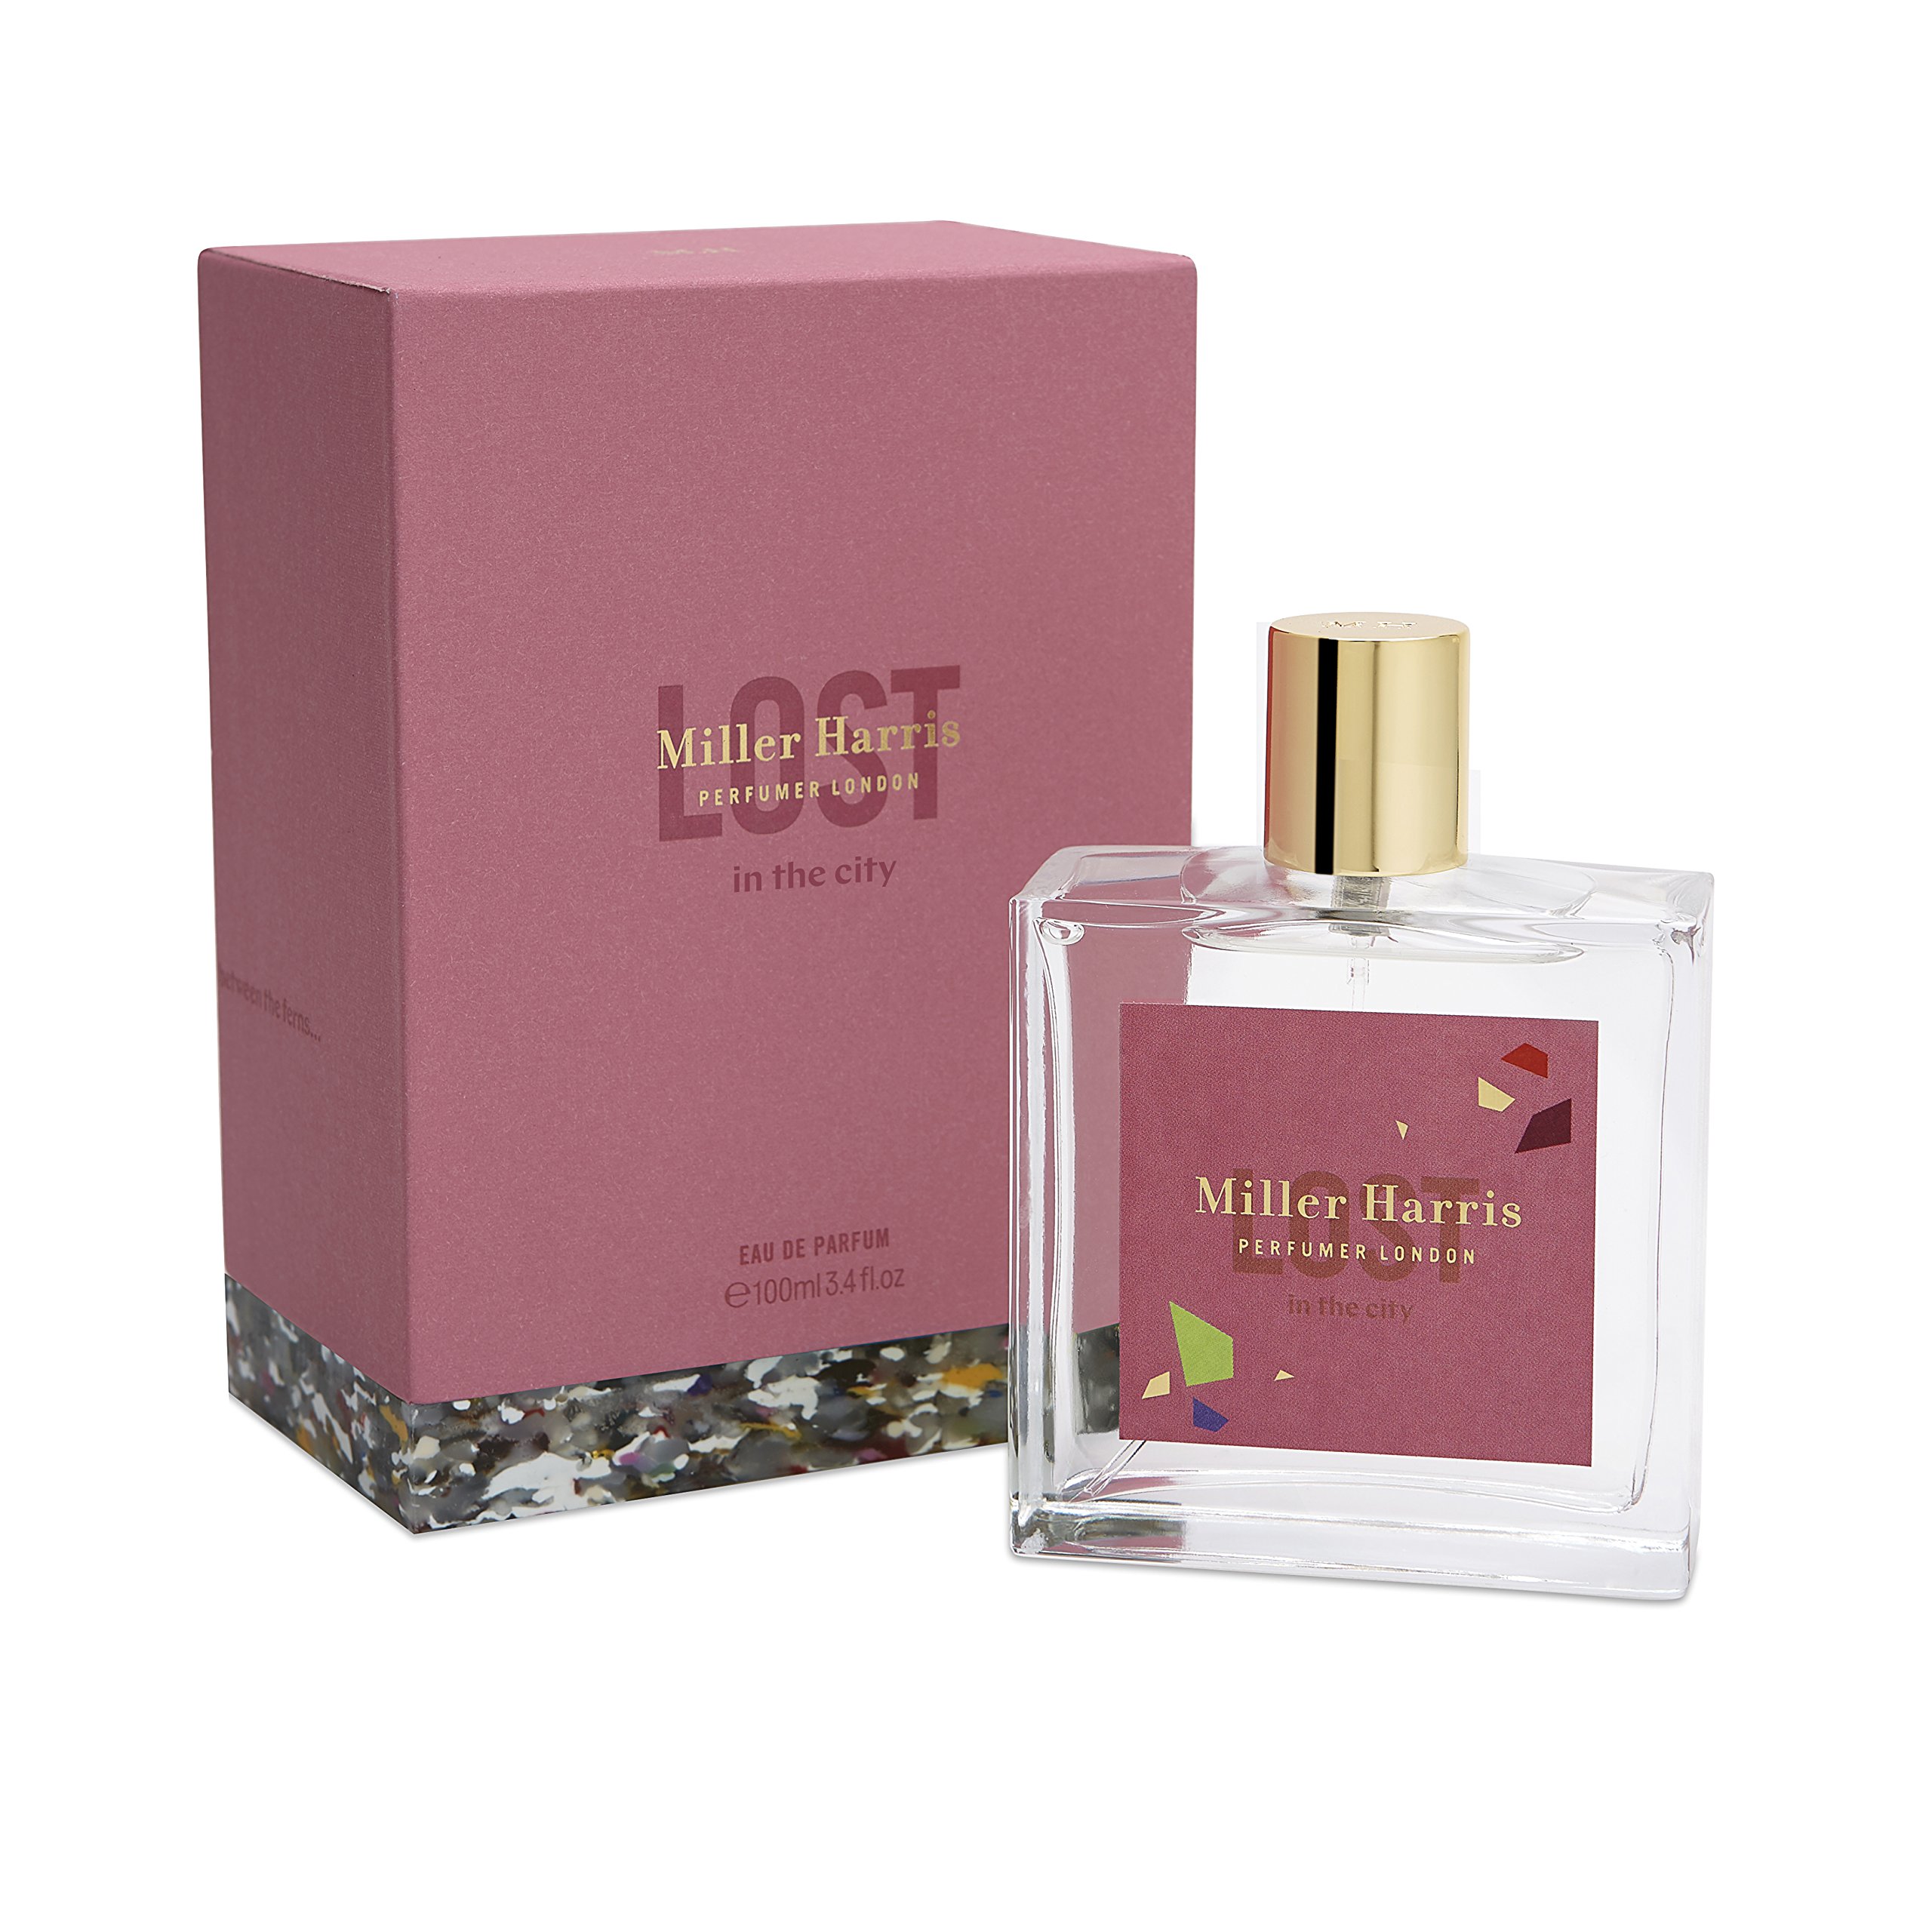 Miller Harris Lost In the City 100 ml